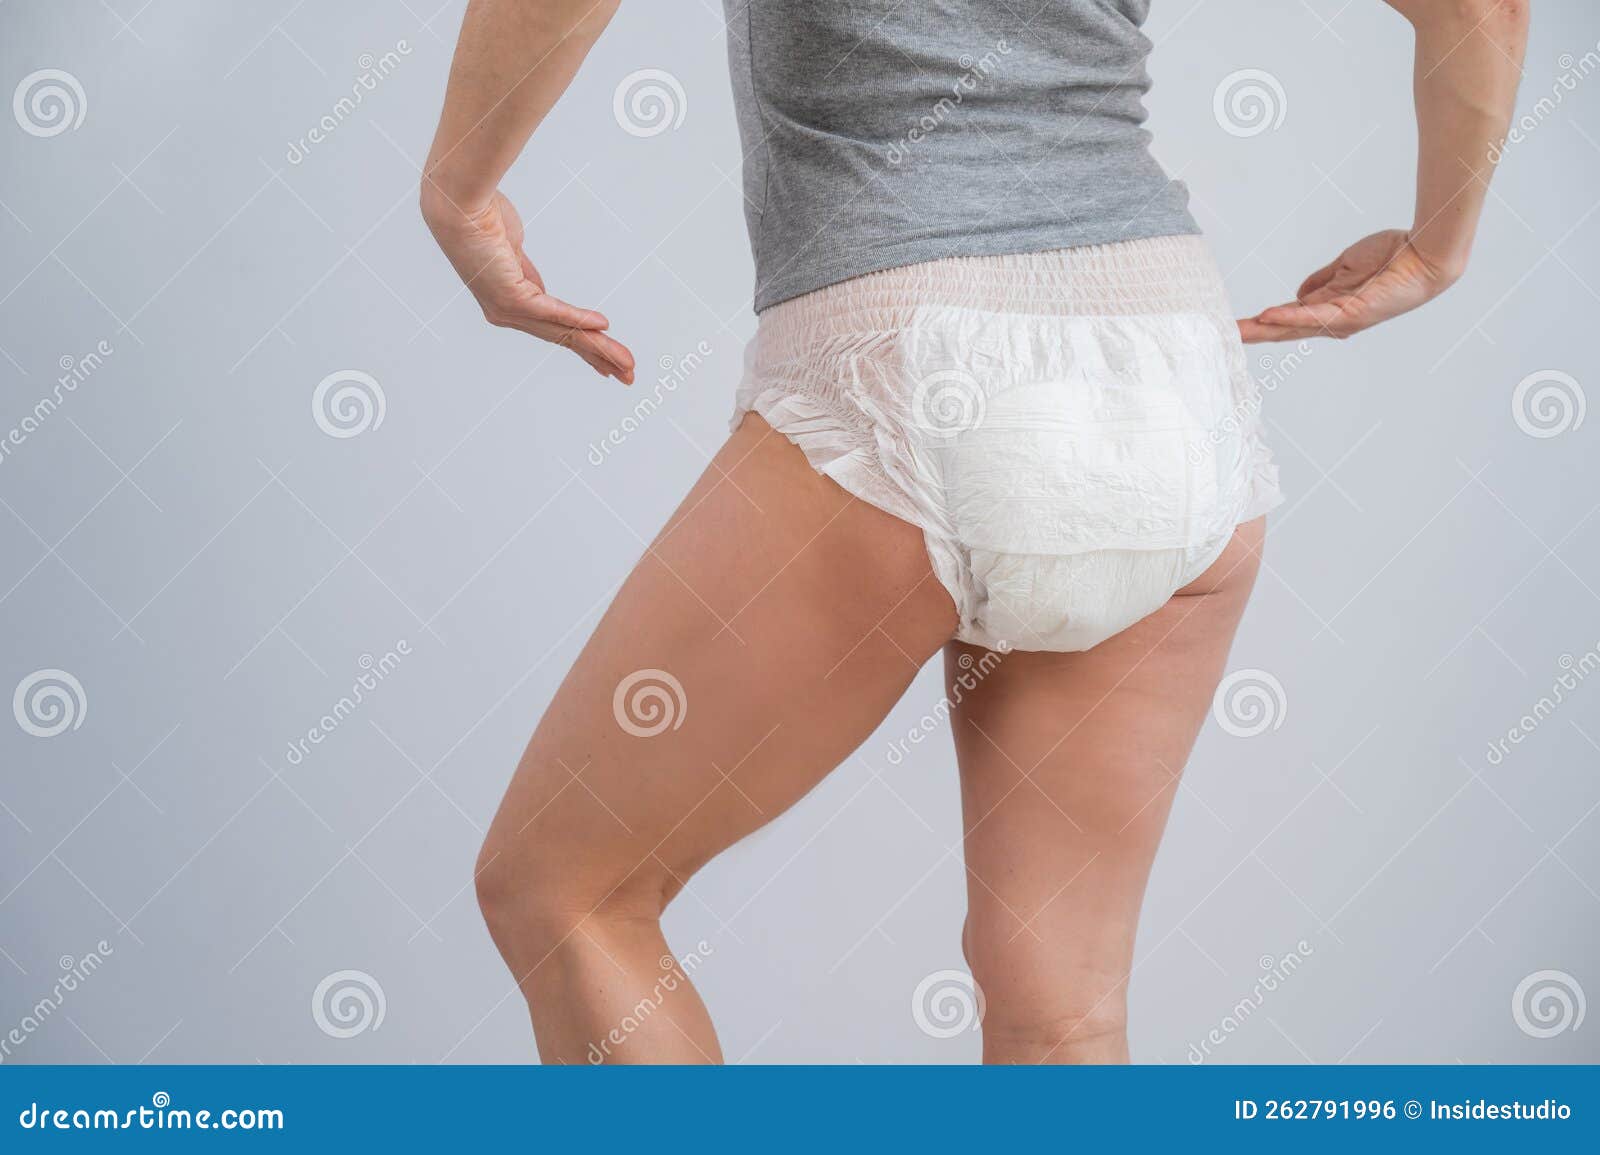 Best of Pictures of women wearing diapers